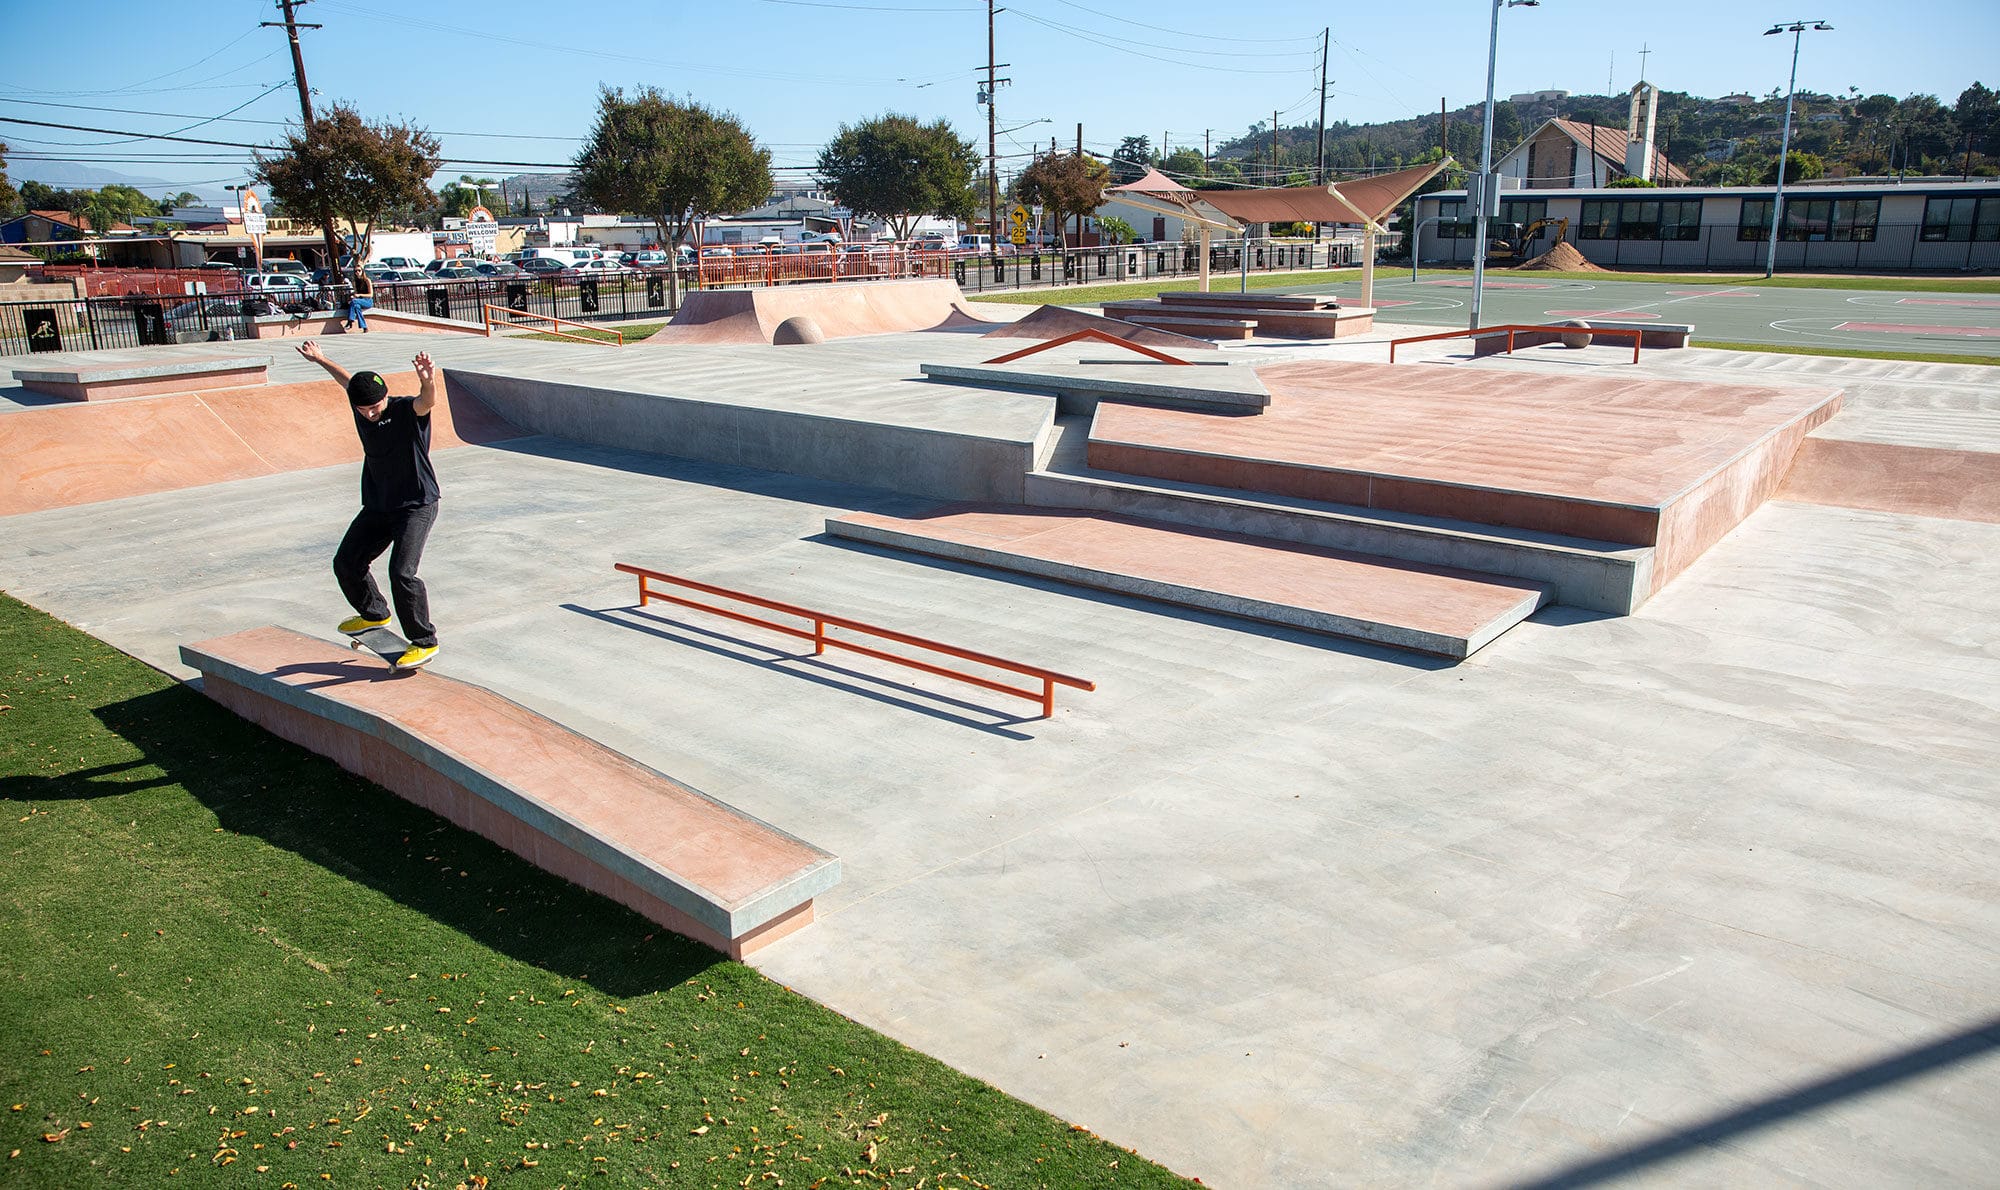 Nosegrind up and down the A Frame ledge by Flip Pro Matt Berger in La Puente, CA